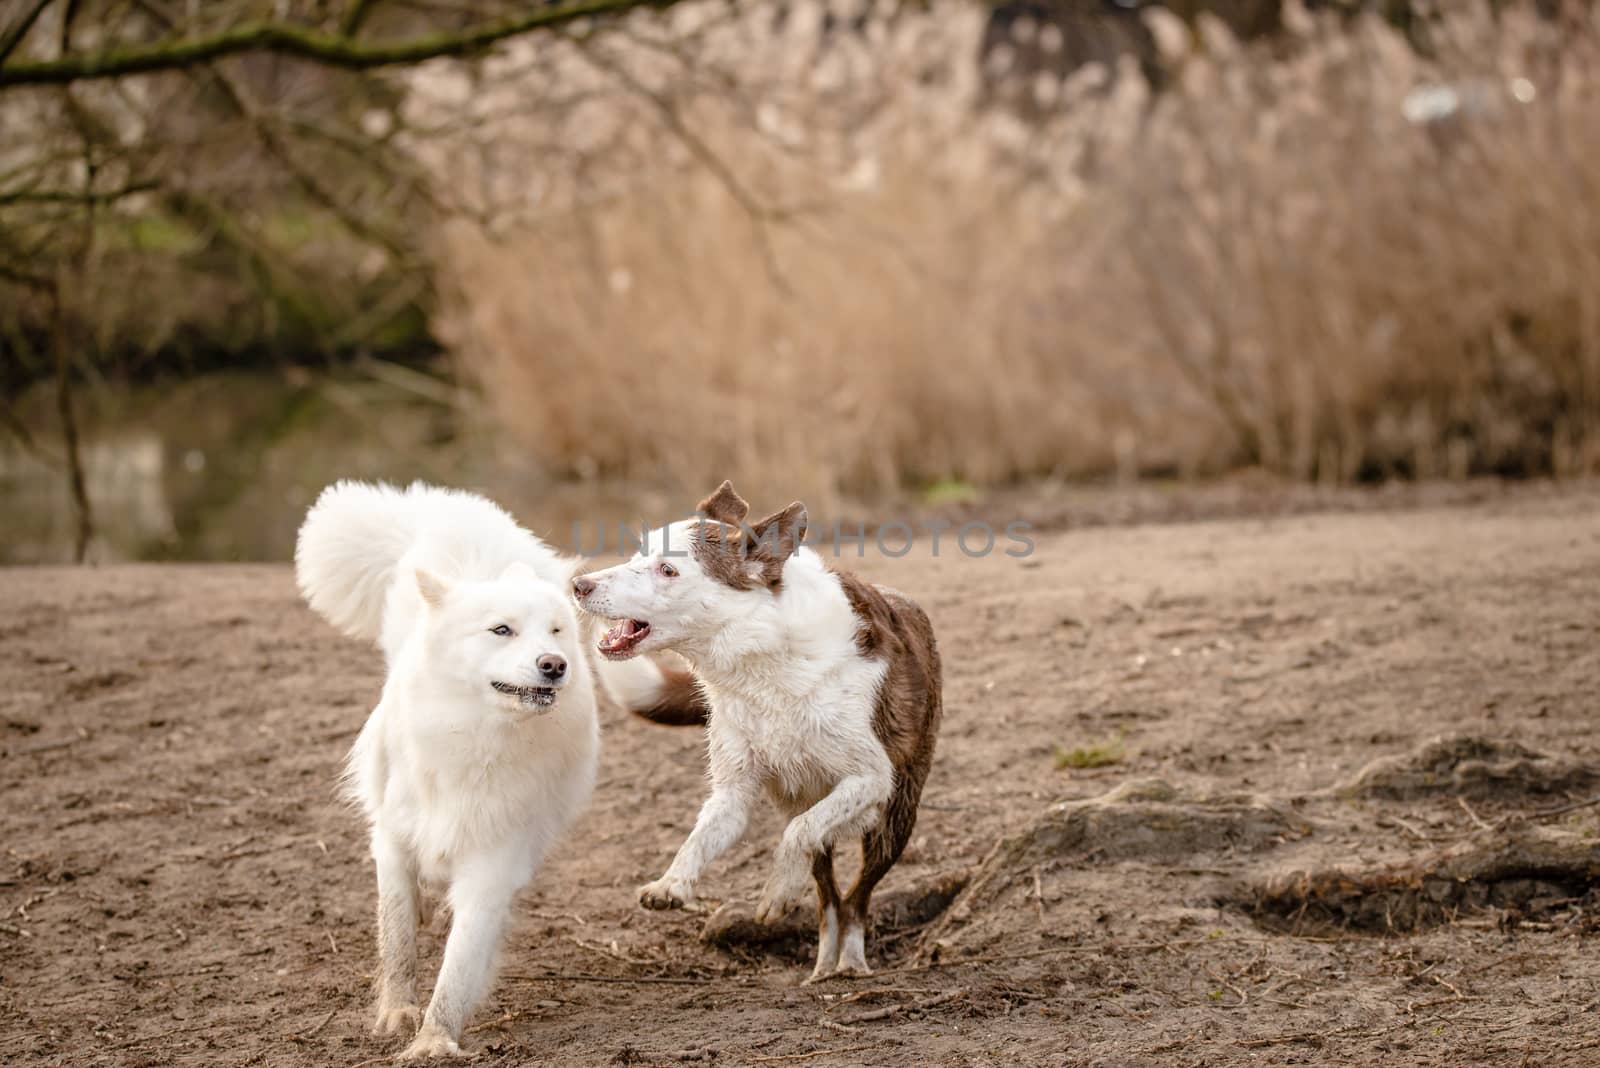 Cute, fluffy white Samoyed dog and her Border Collie friend by Pendleton